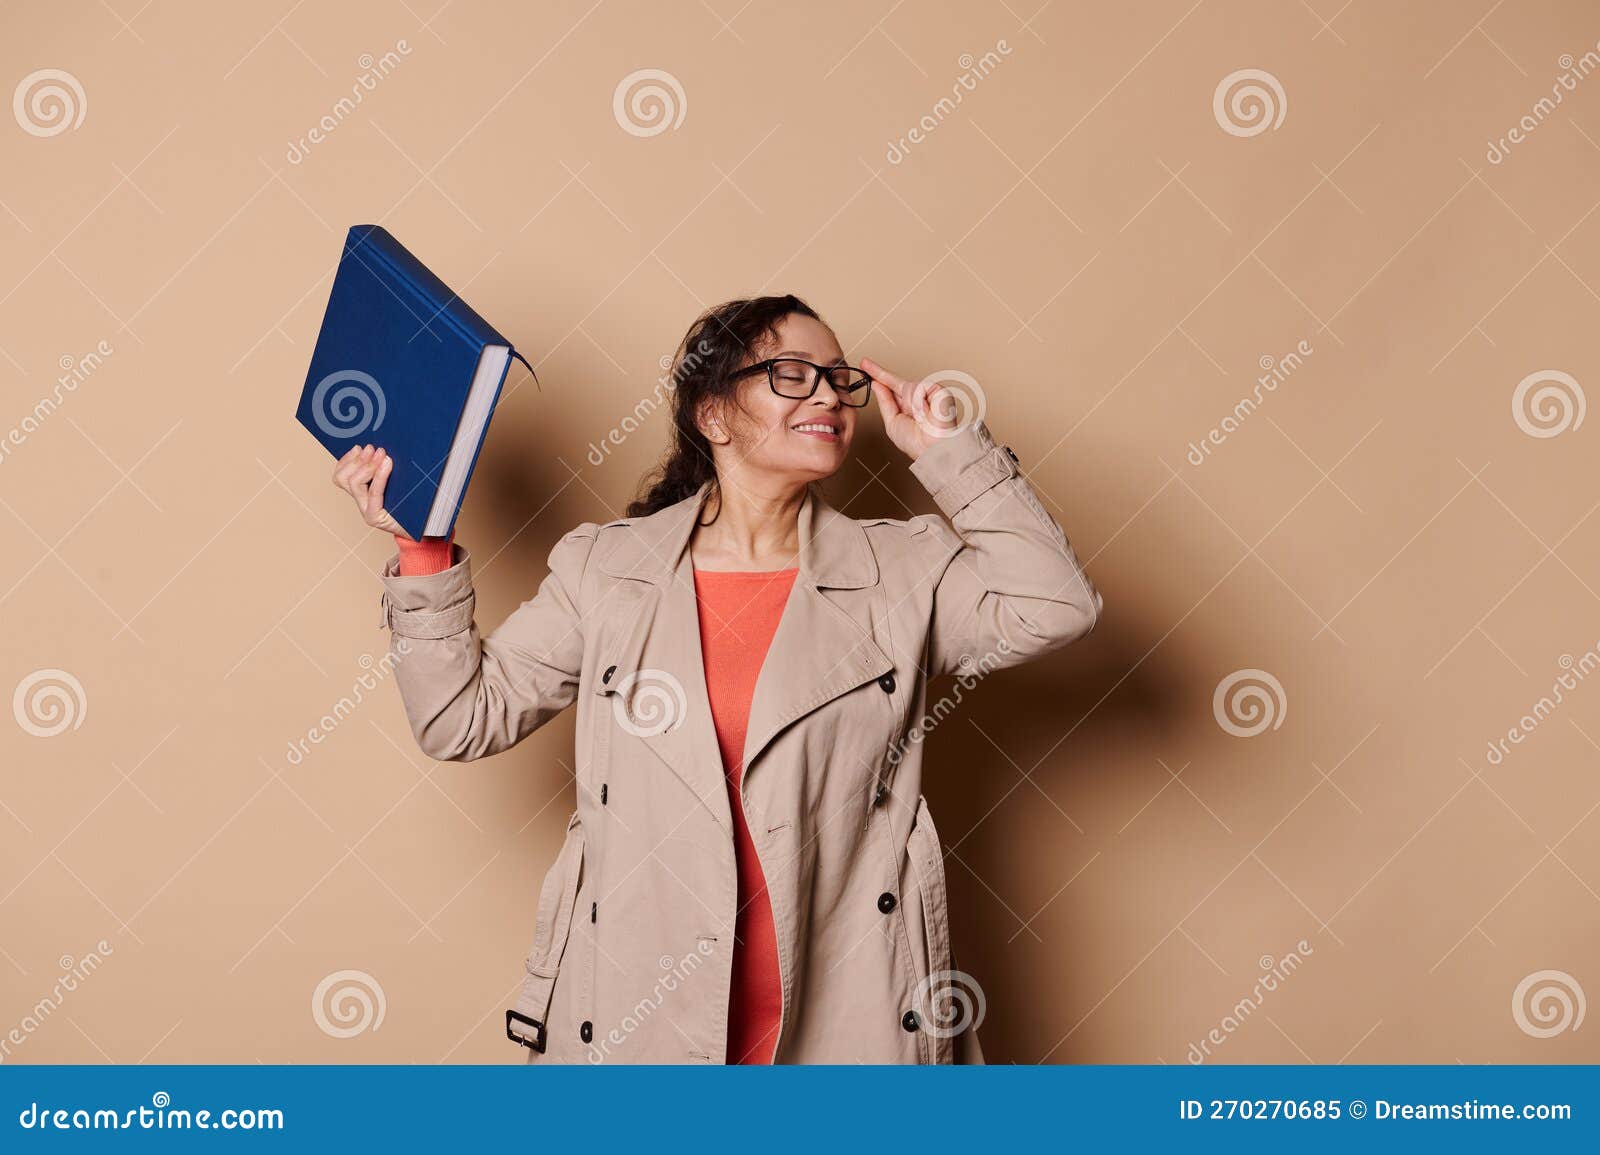 portrait on beige background of a smiling multi-ethnic middle-aged female educator, school teacher with a harcover book